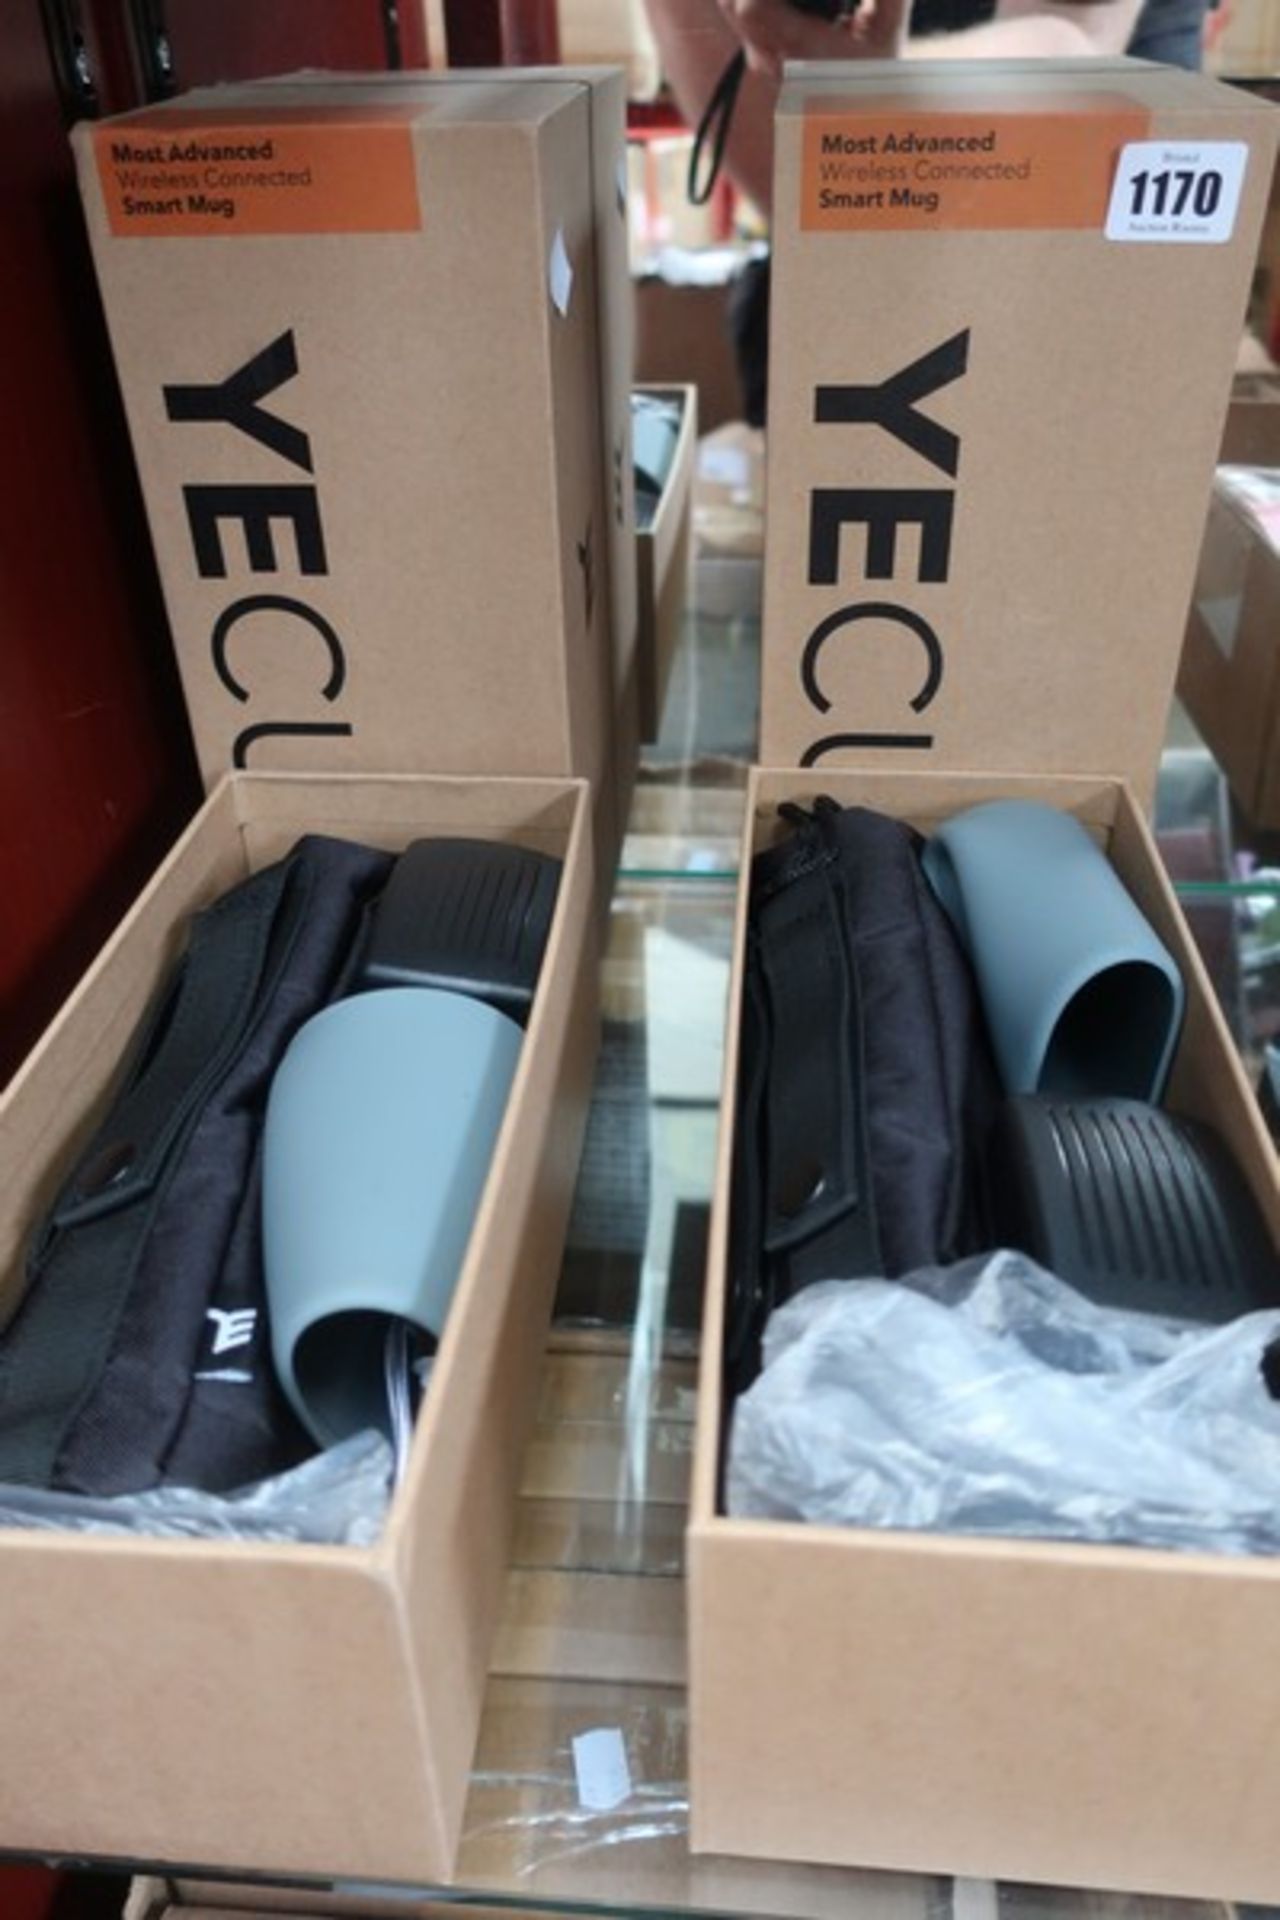 Two boxed as new YEcups - wireless connected smart mugs.